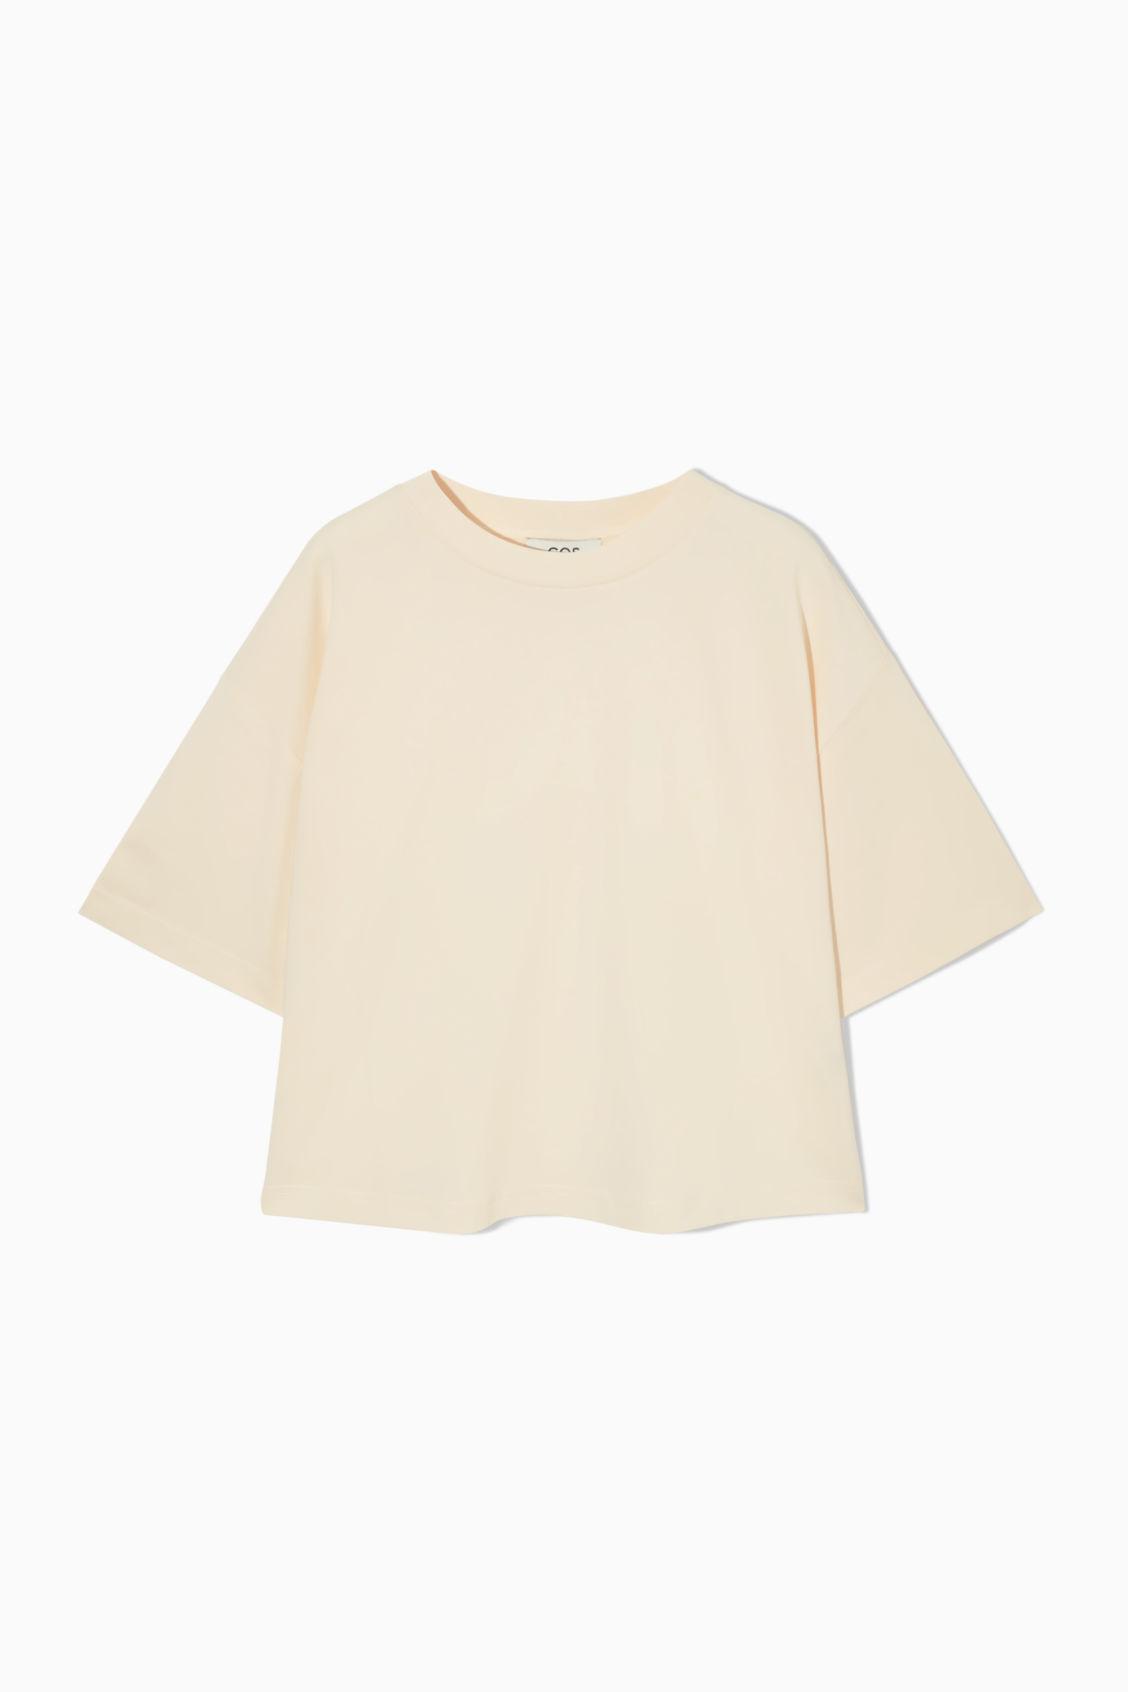 COS Cotton Relaxed-fit Cropped T-shirt in Orange | Lyst